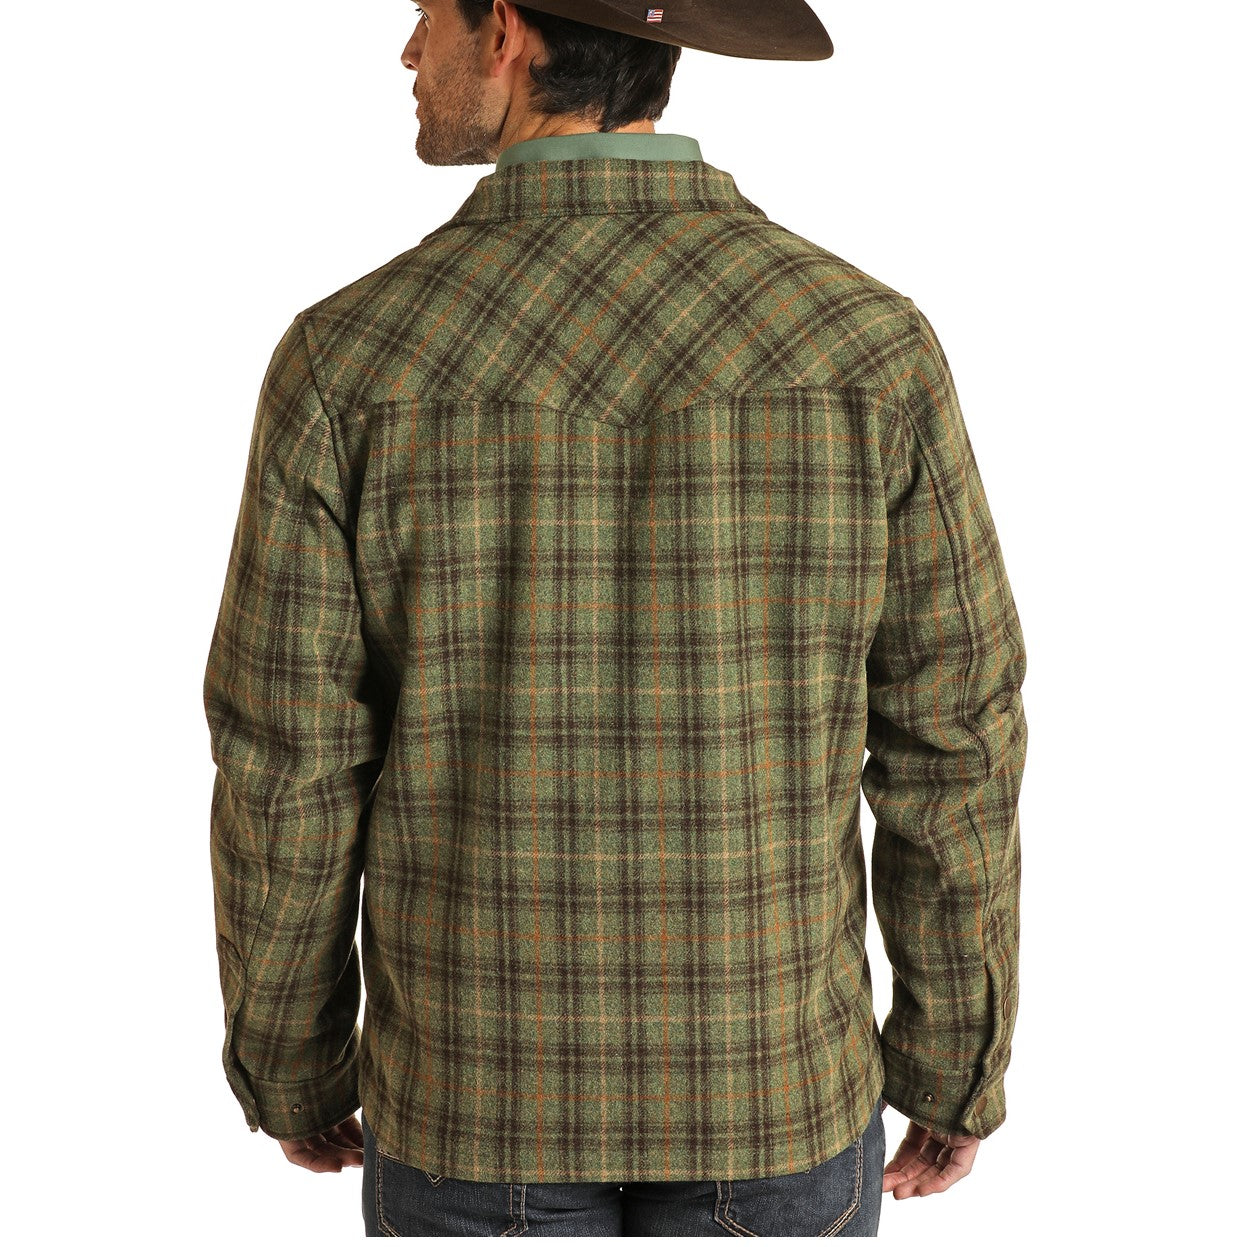 Powder River Outfitters Men's Plaid Wool Olive Coat Jacket 92-1013-31